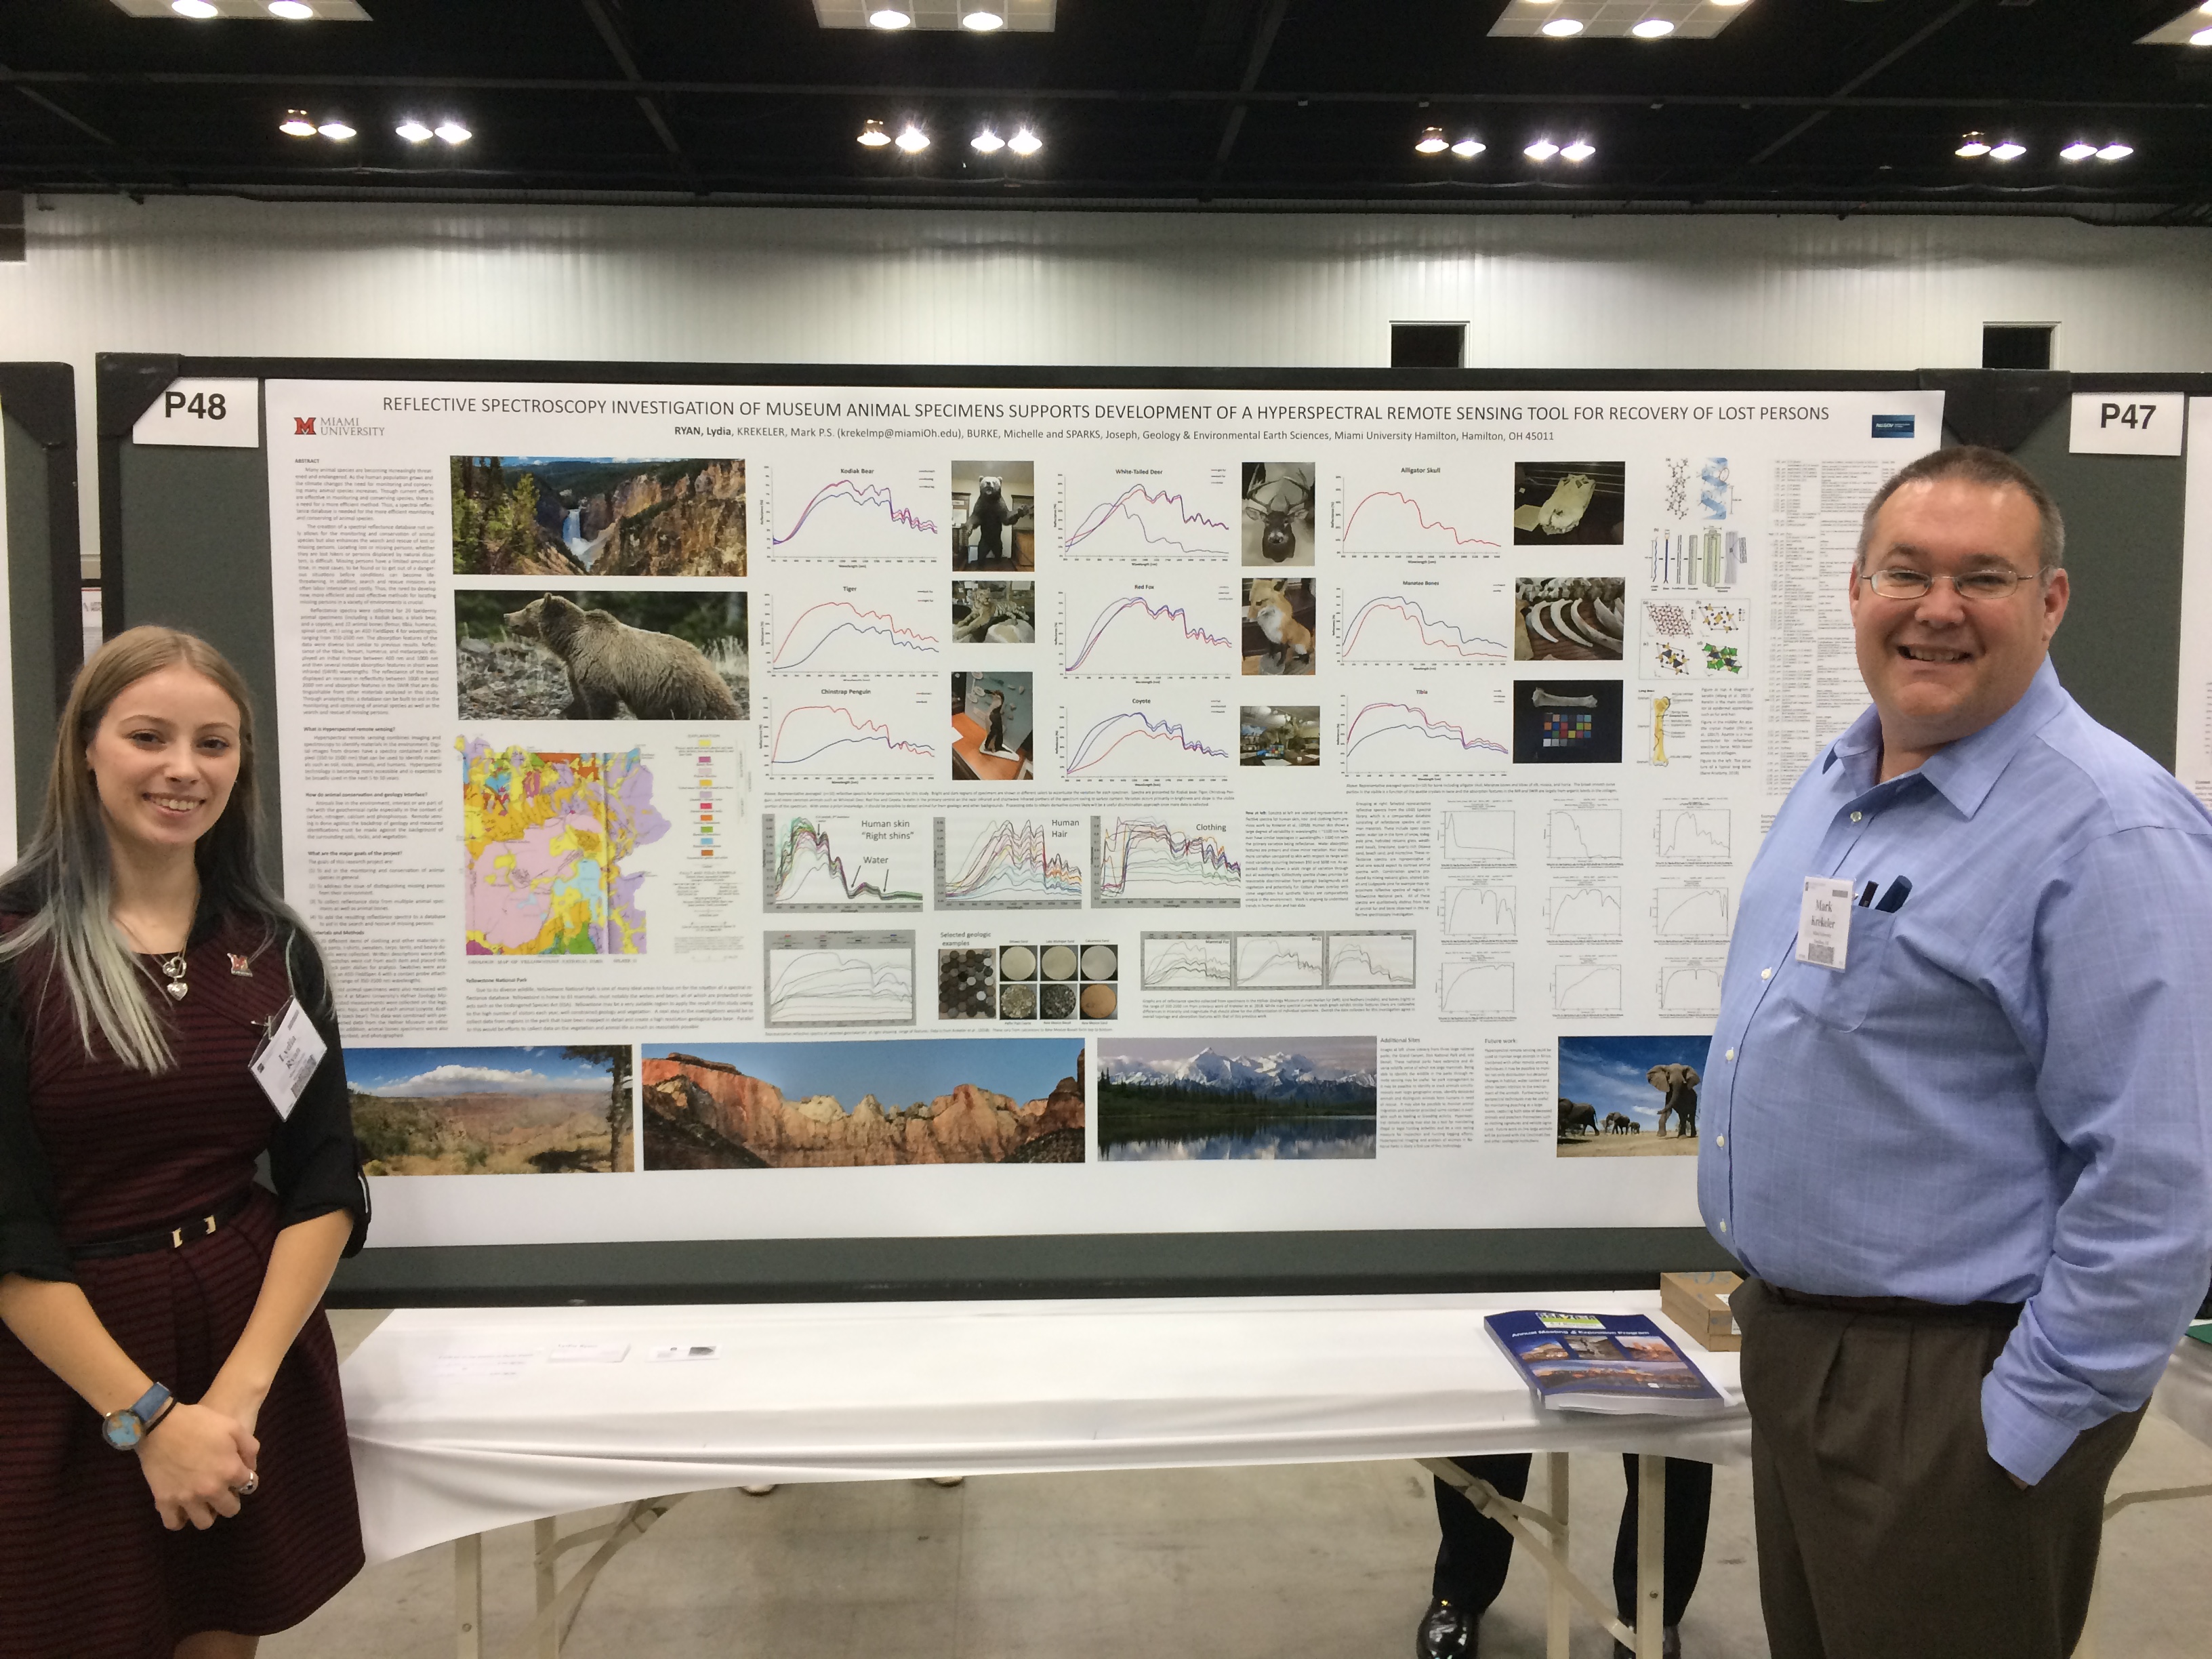 Photo of Lydia Ryan with Mark Krekeler as she presents her poster on reflective spectroscopy of animal specimens to support conservation efforts and support search and rescue technology.